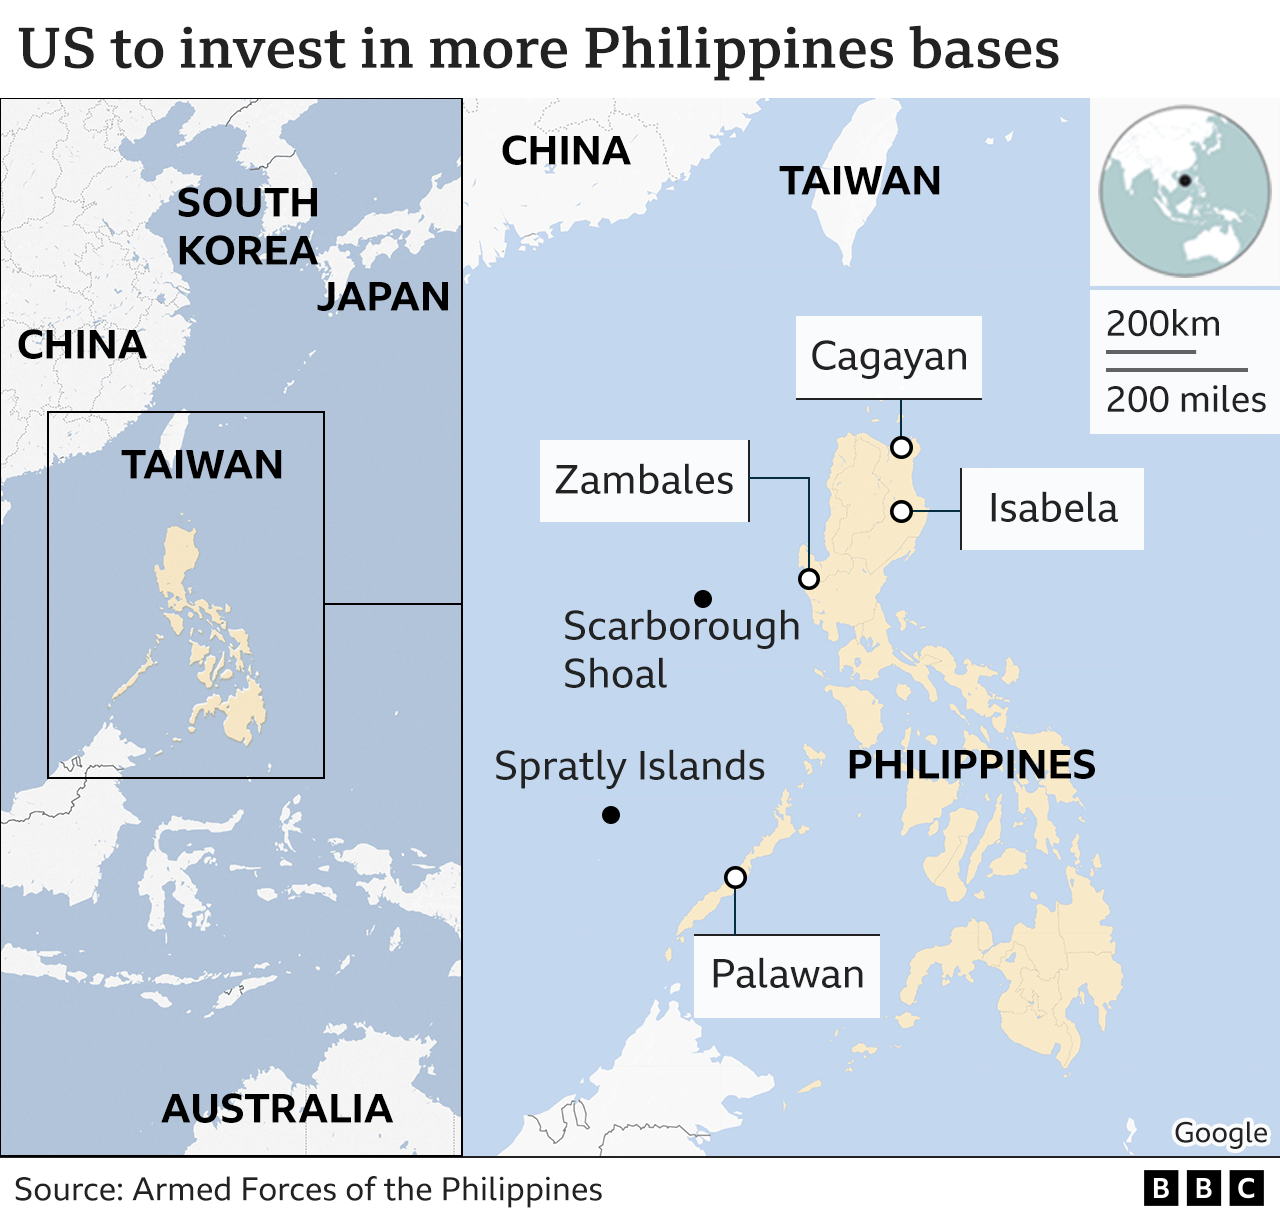 US secures deal on Philippines bases to complete arc around China - BBC News